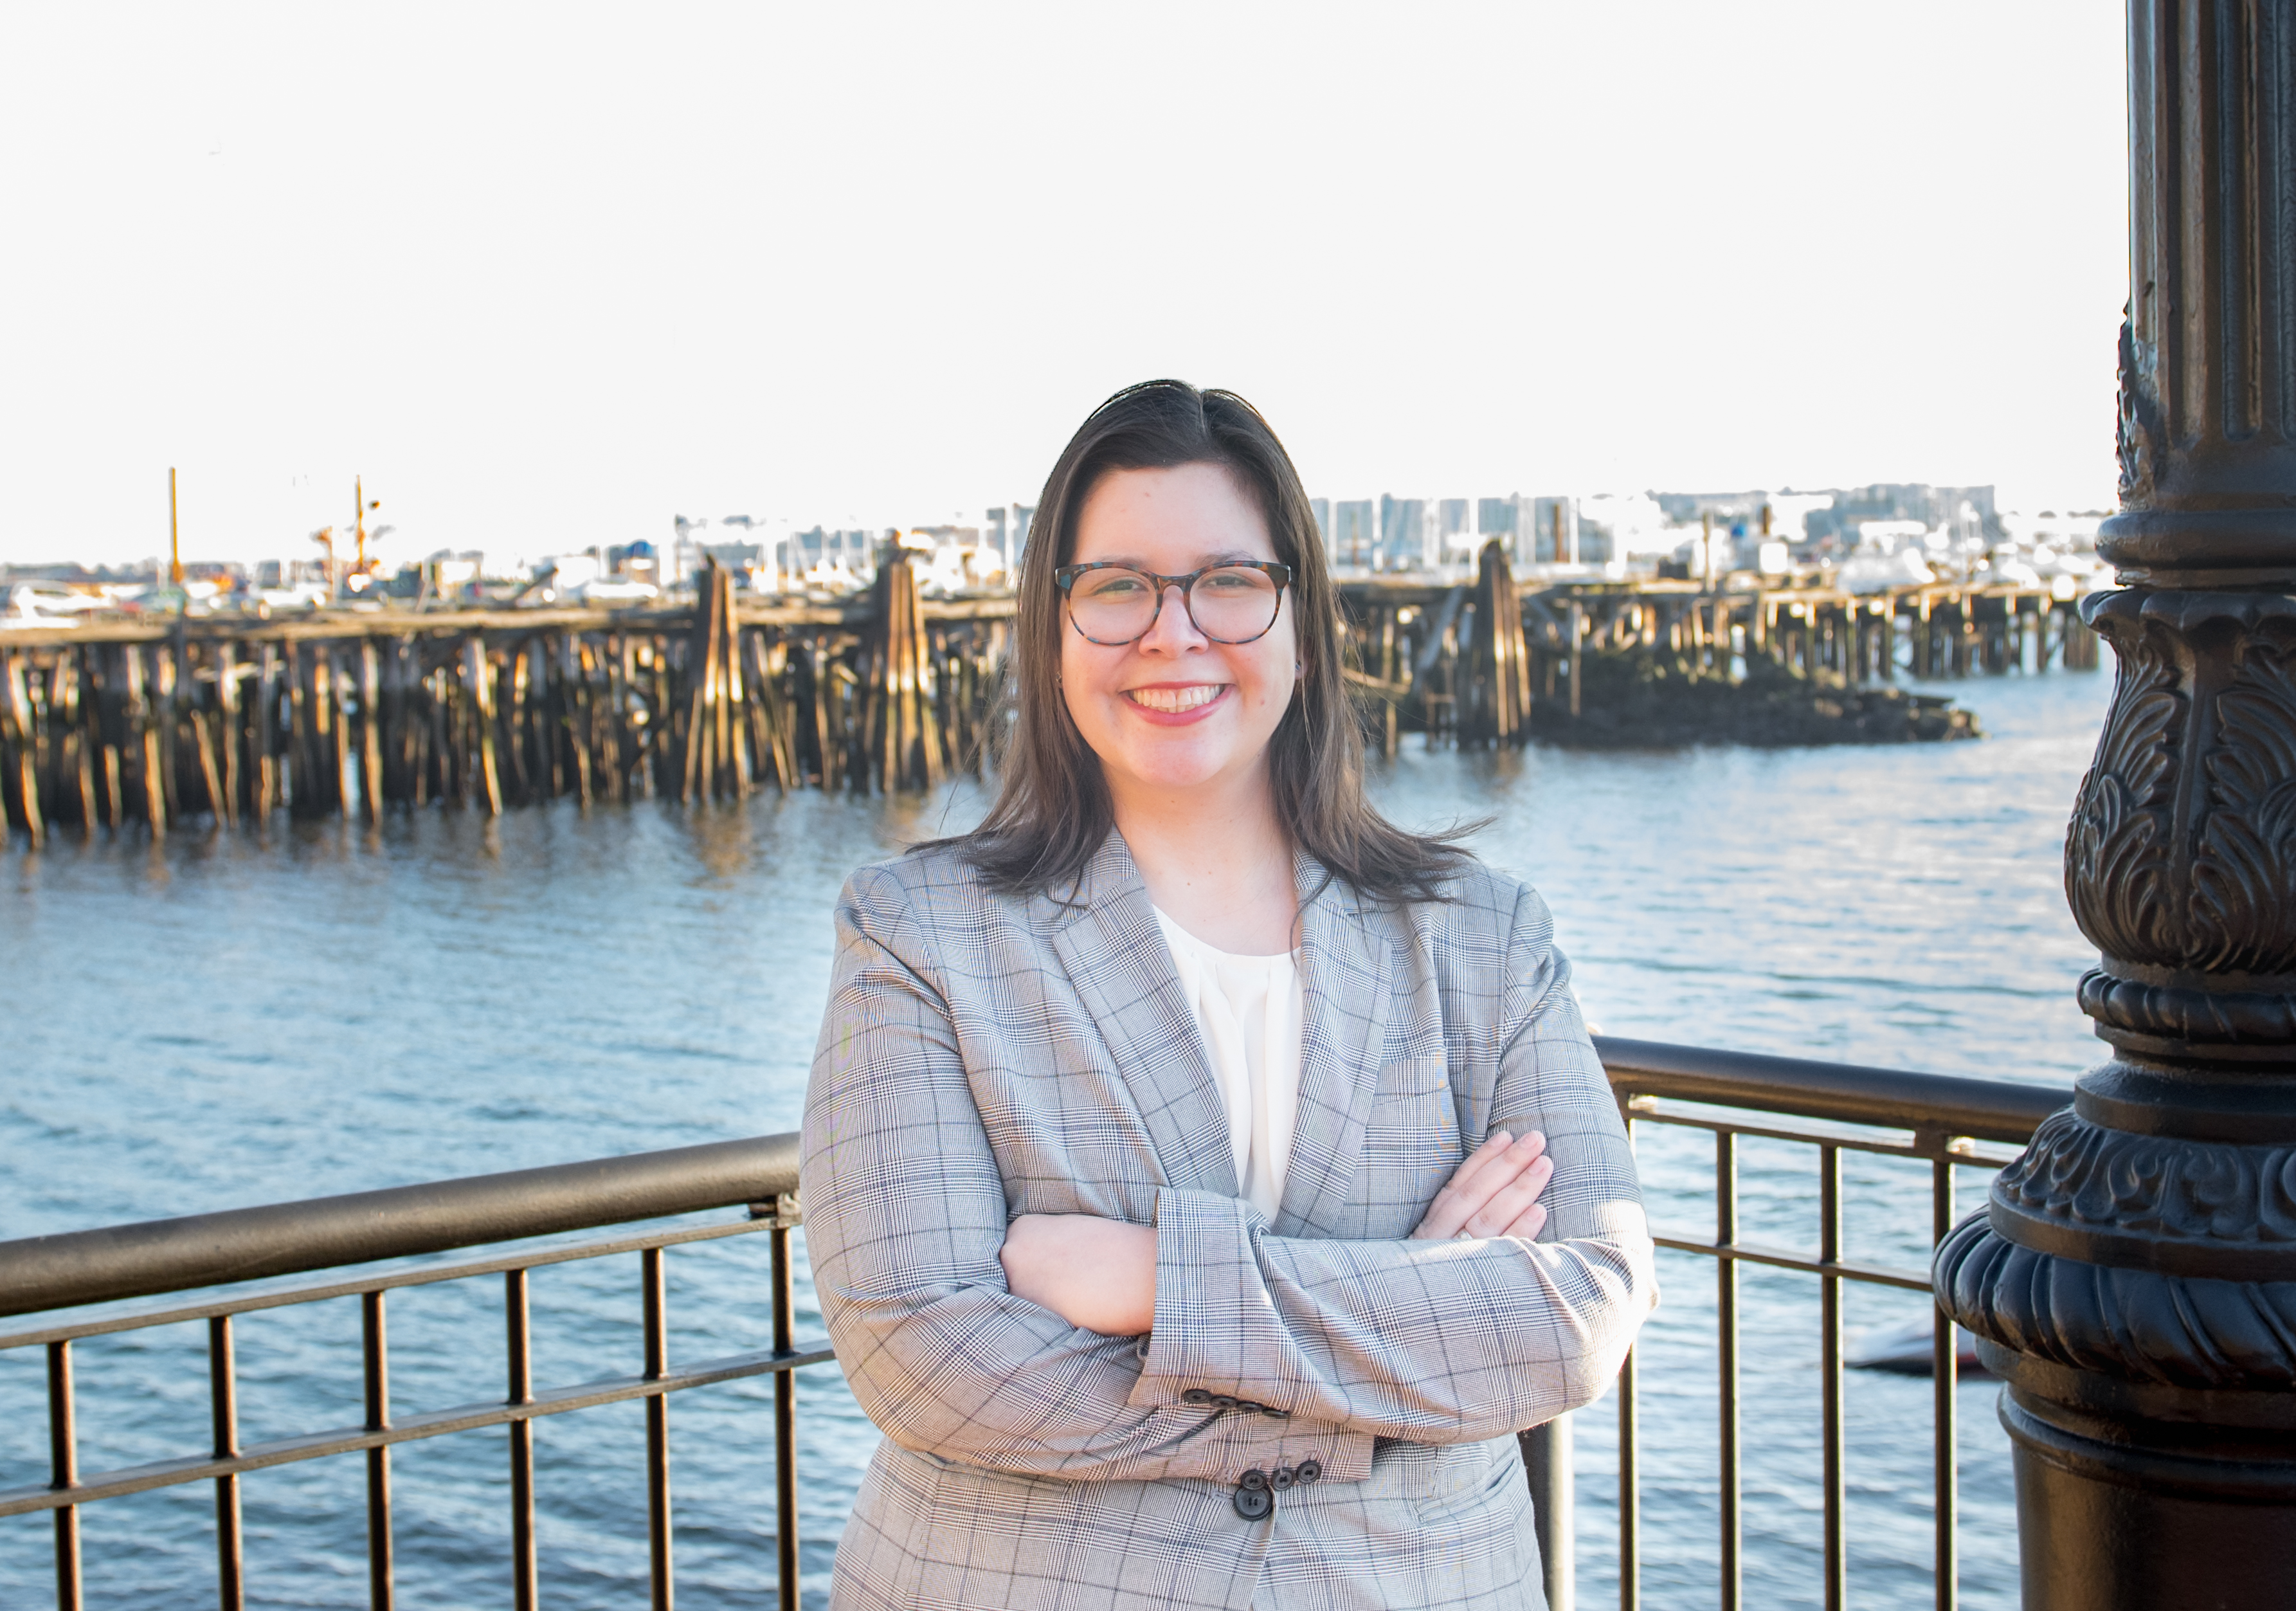 photo of woman standing in front of boston harbor. She is wearing a gray suit jacket and eye glasses. She is smiling. 